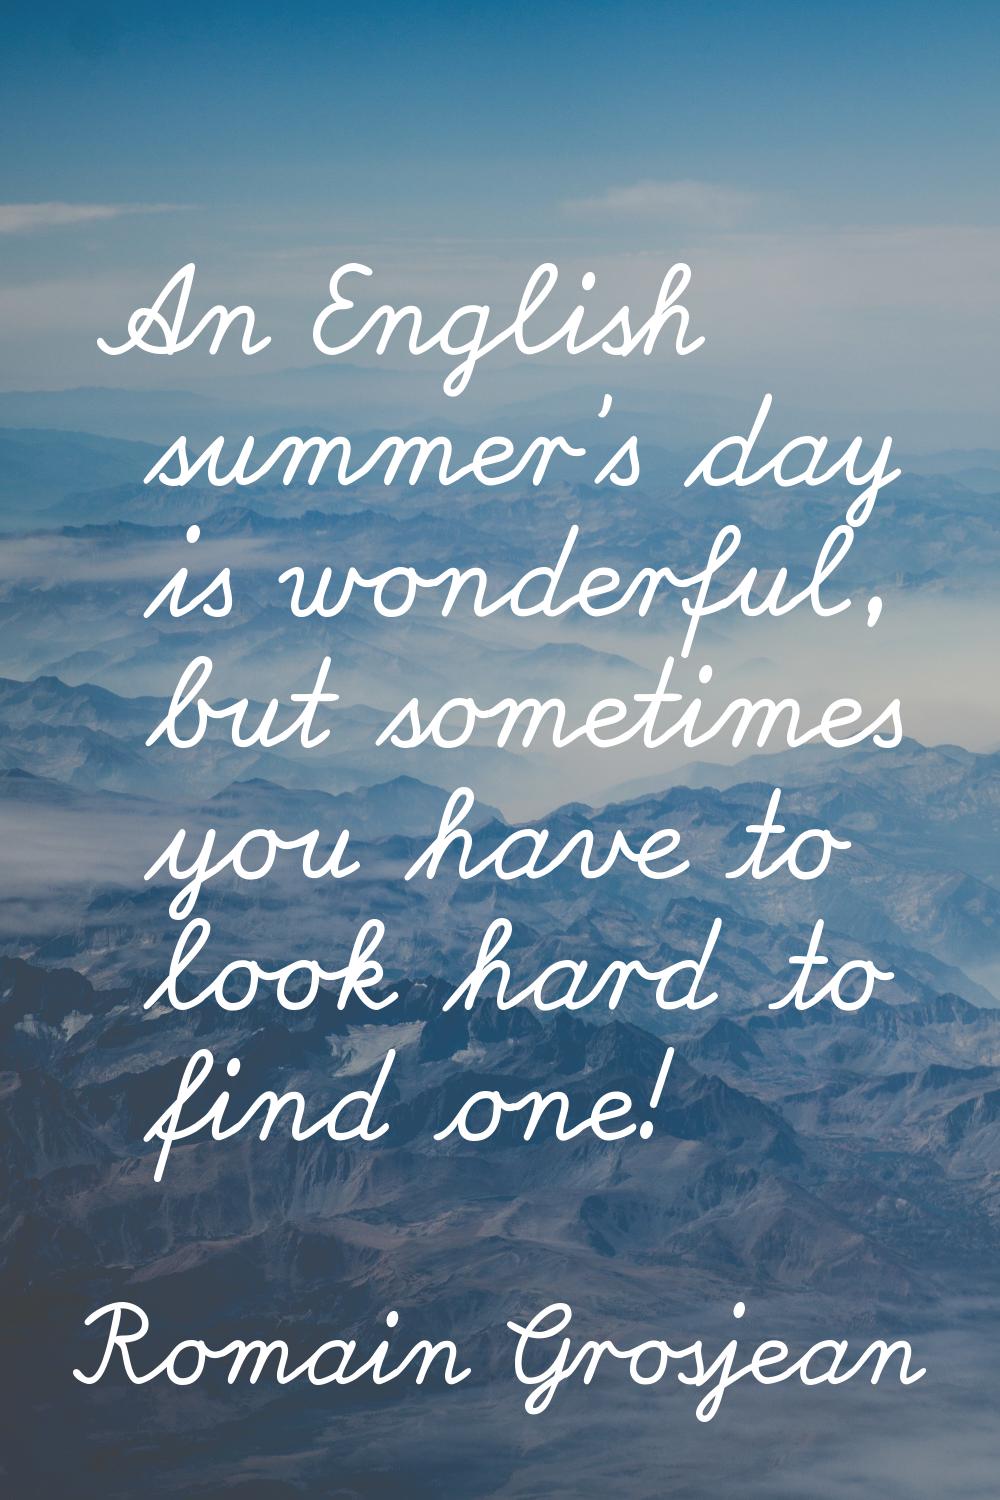 An English summer's day is wonderful, but sometimes you have to look hard to find one!